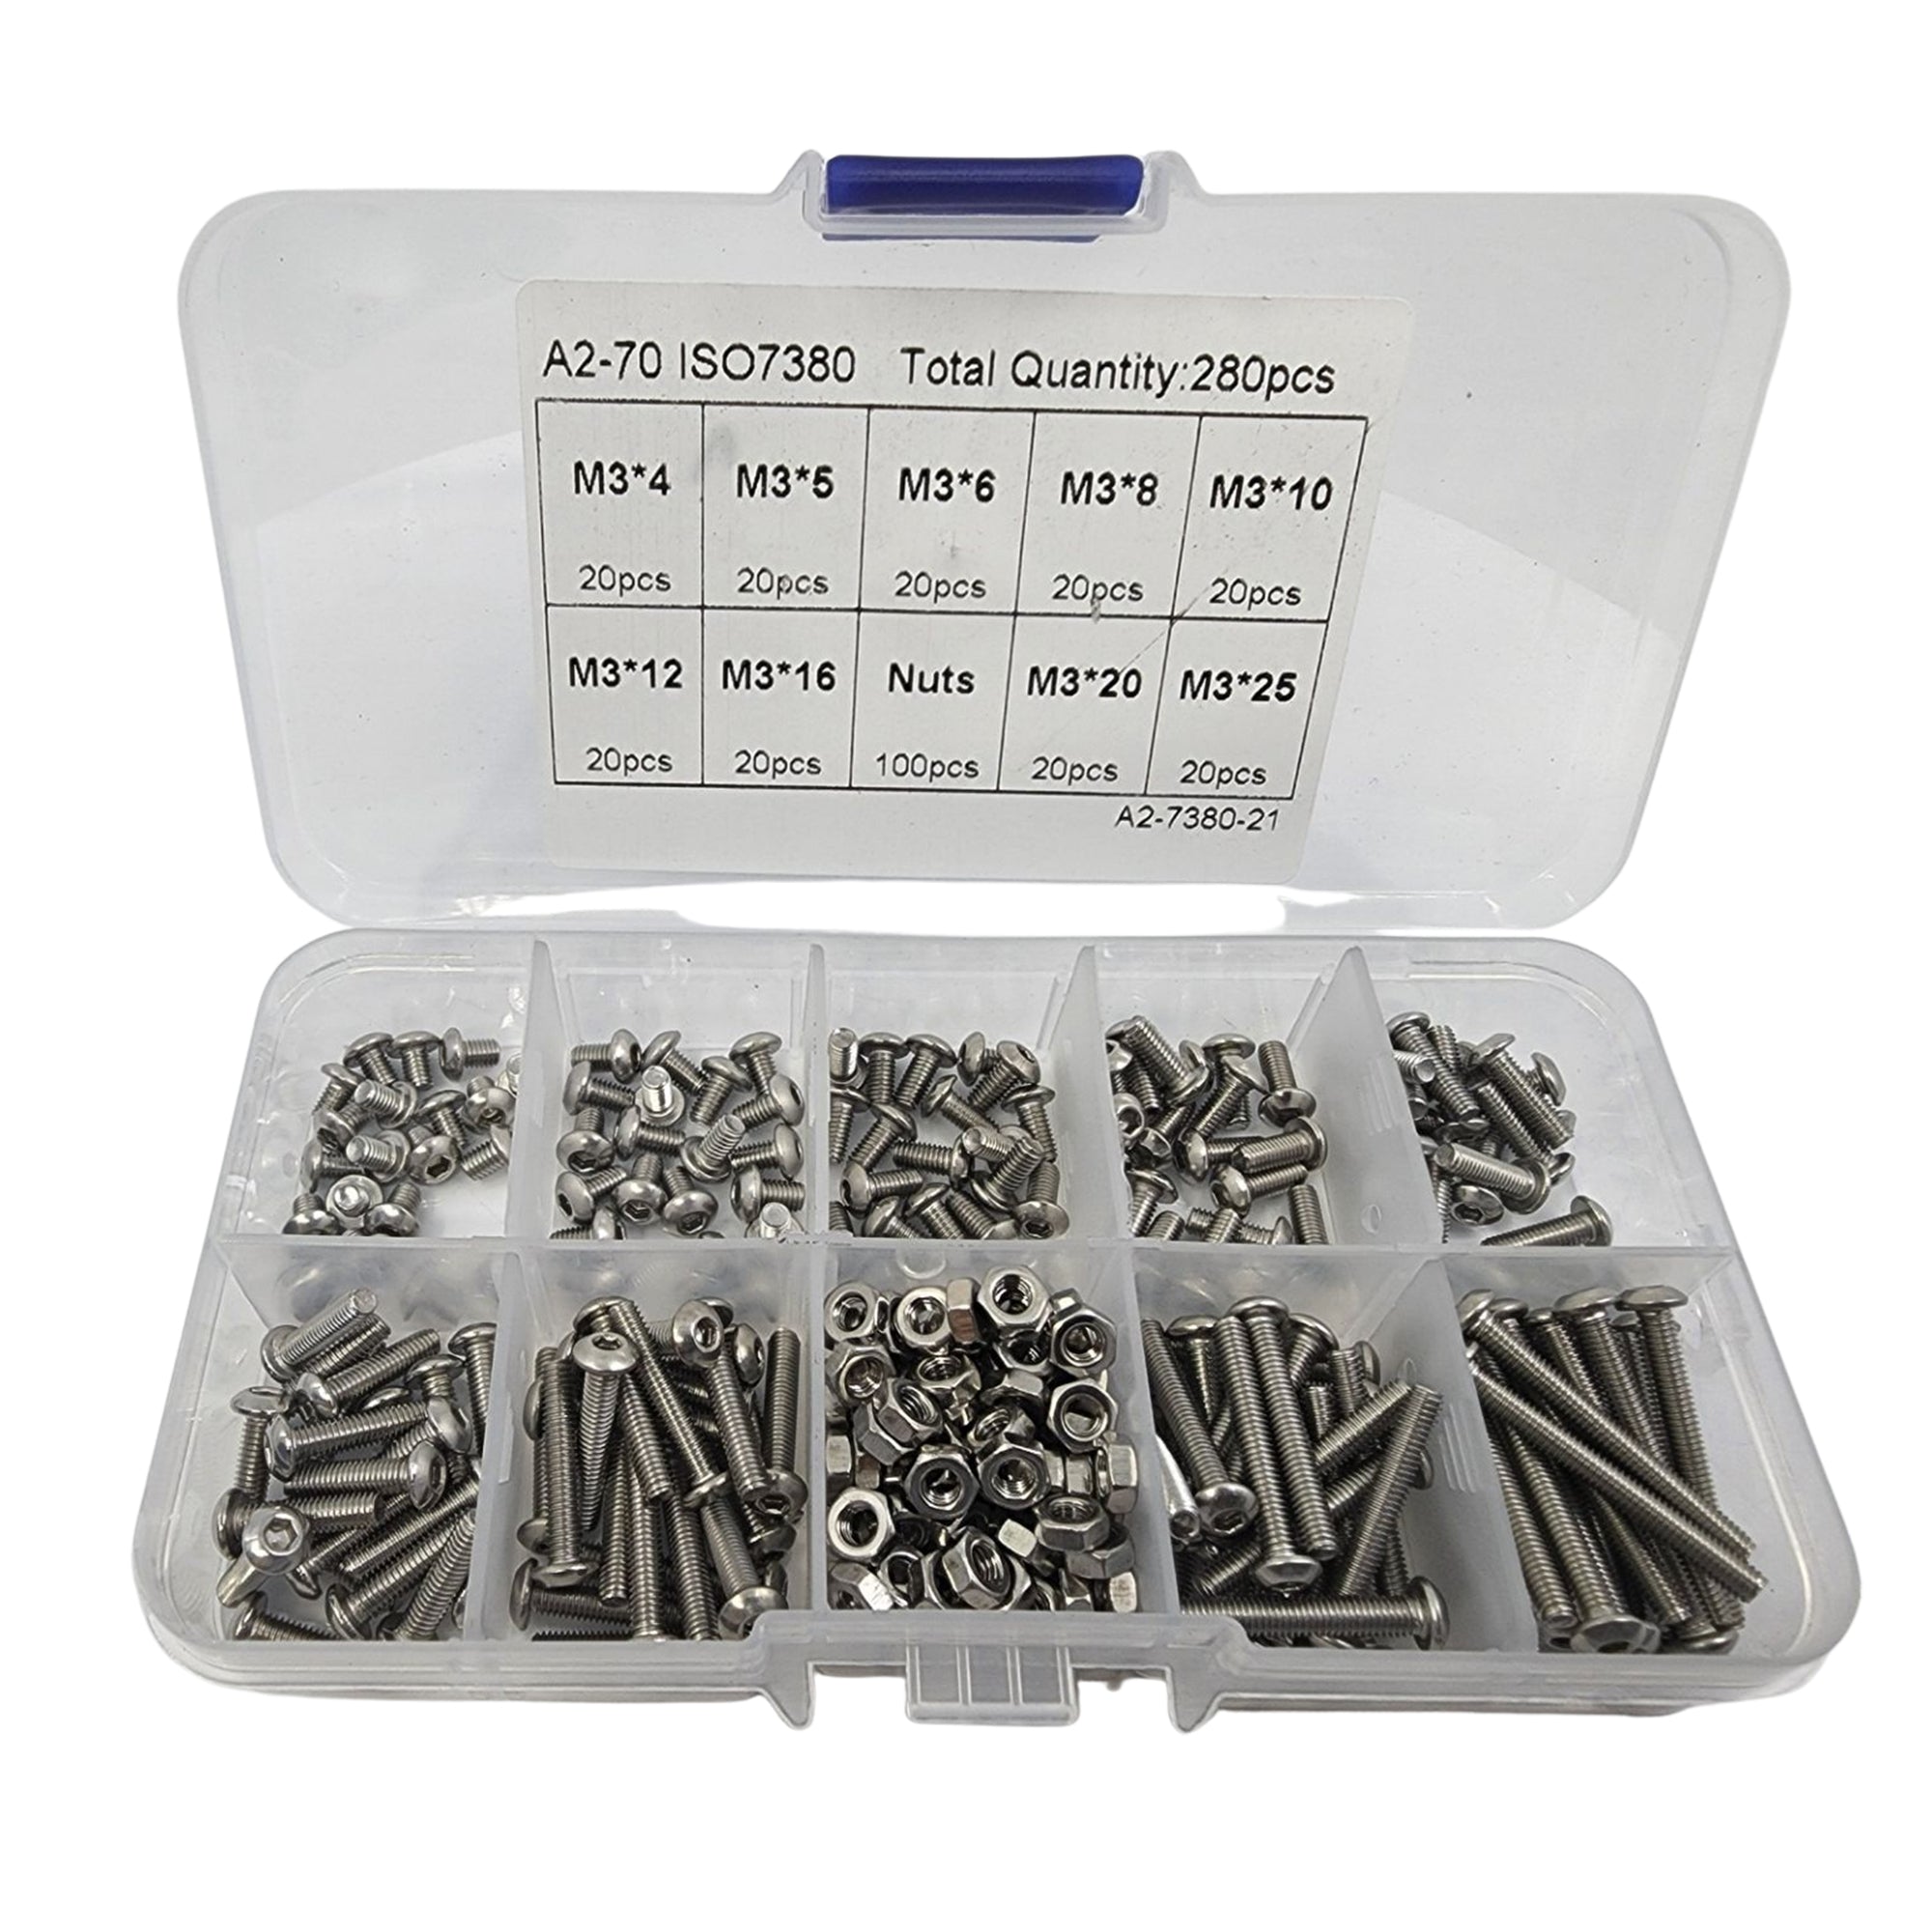 M3 Button Head 280pcs Bolt Fastener Kit By Phaser FPV